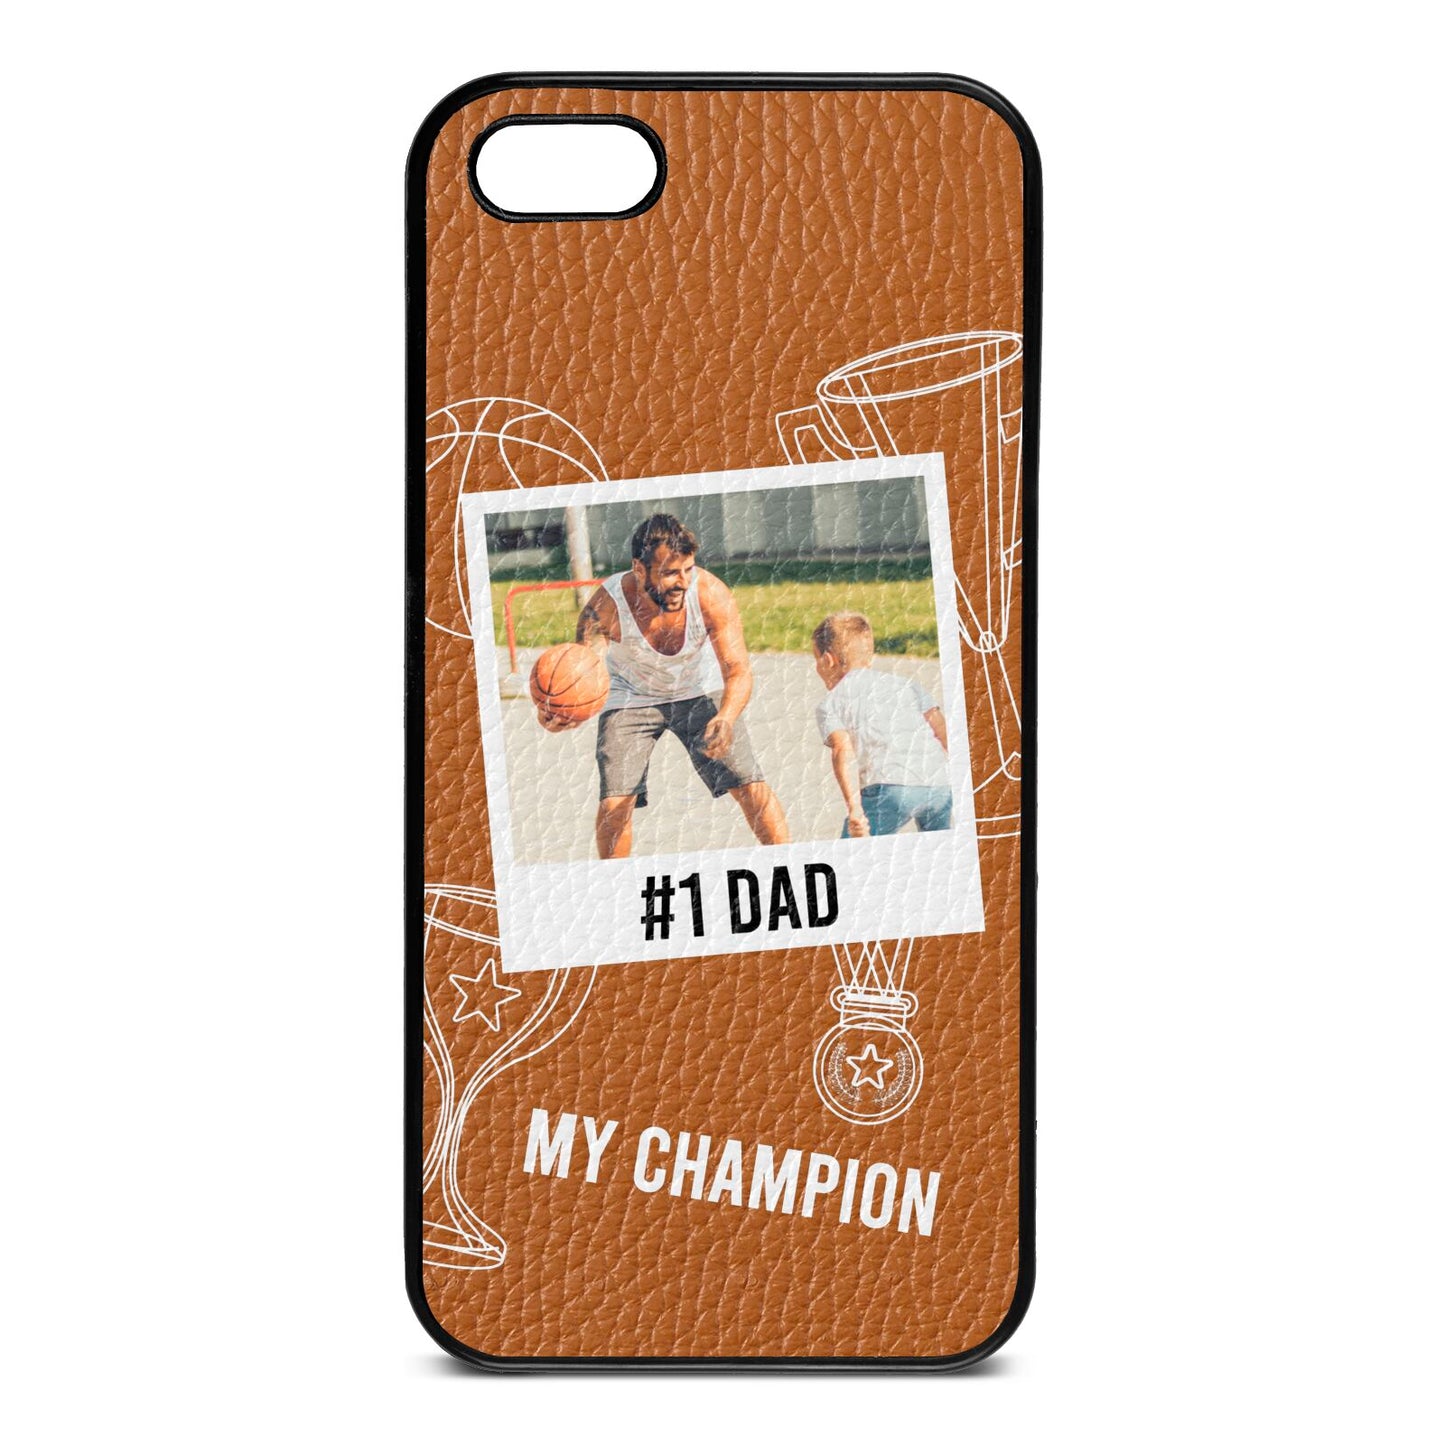 Personalised Number 1 Dad Tan Pebble Leather iPhone 5 Case